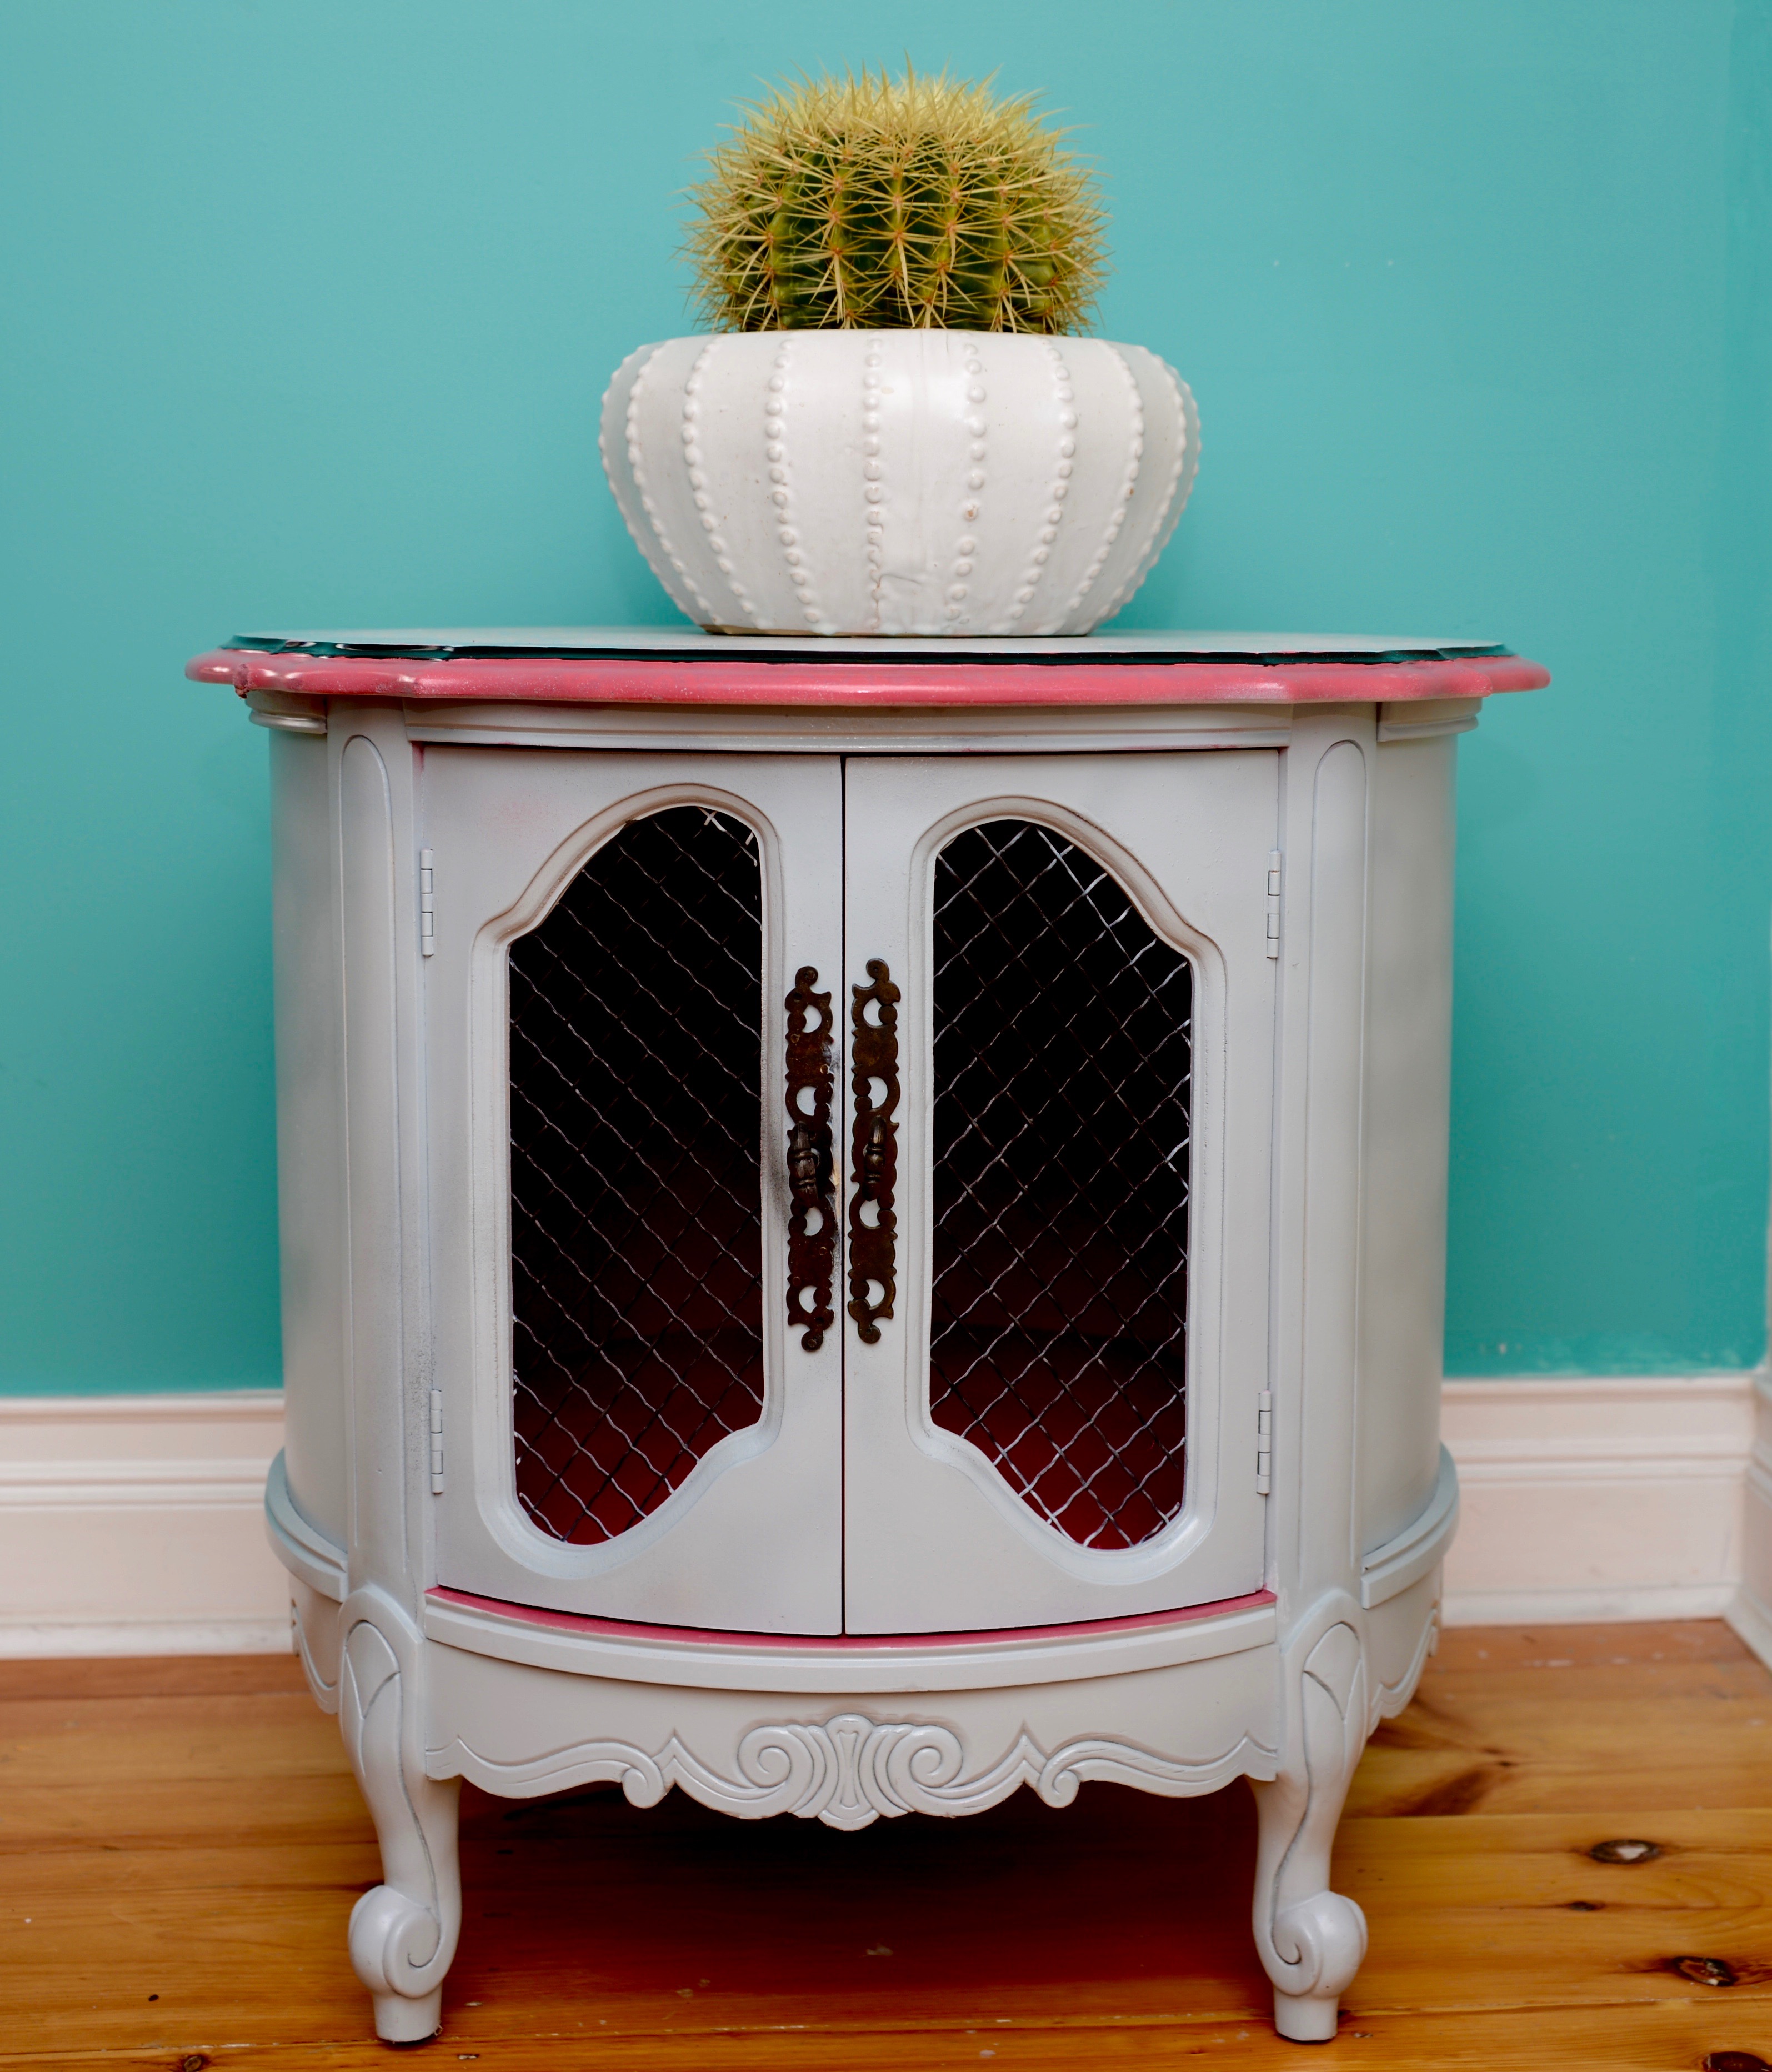 A vintage side table from Habitat ReStore gets a makeover